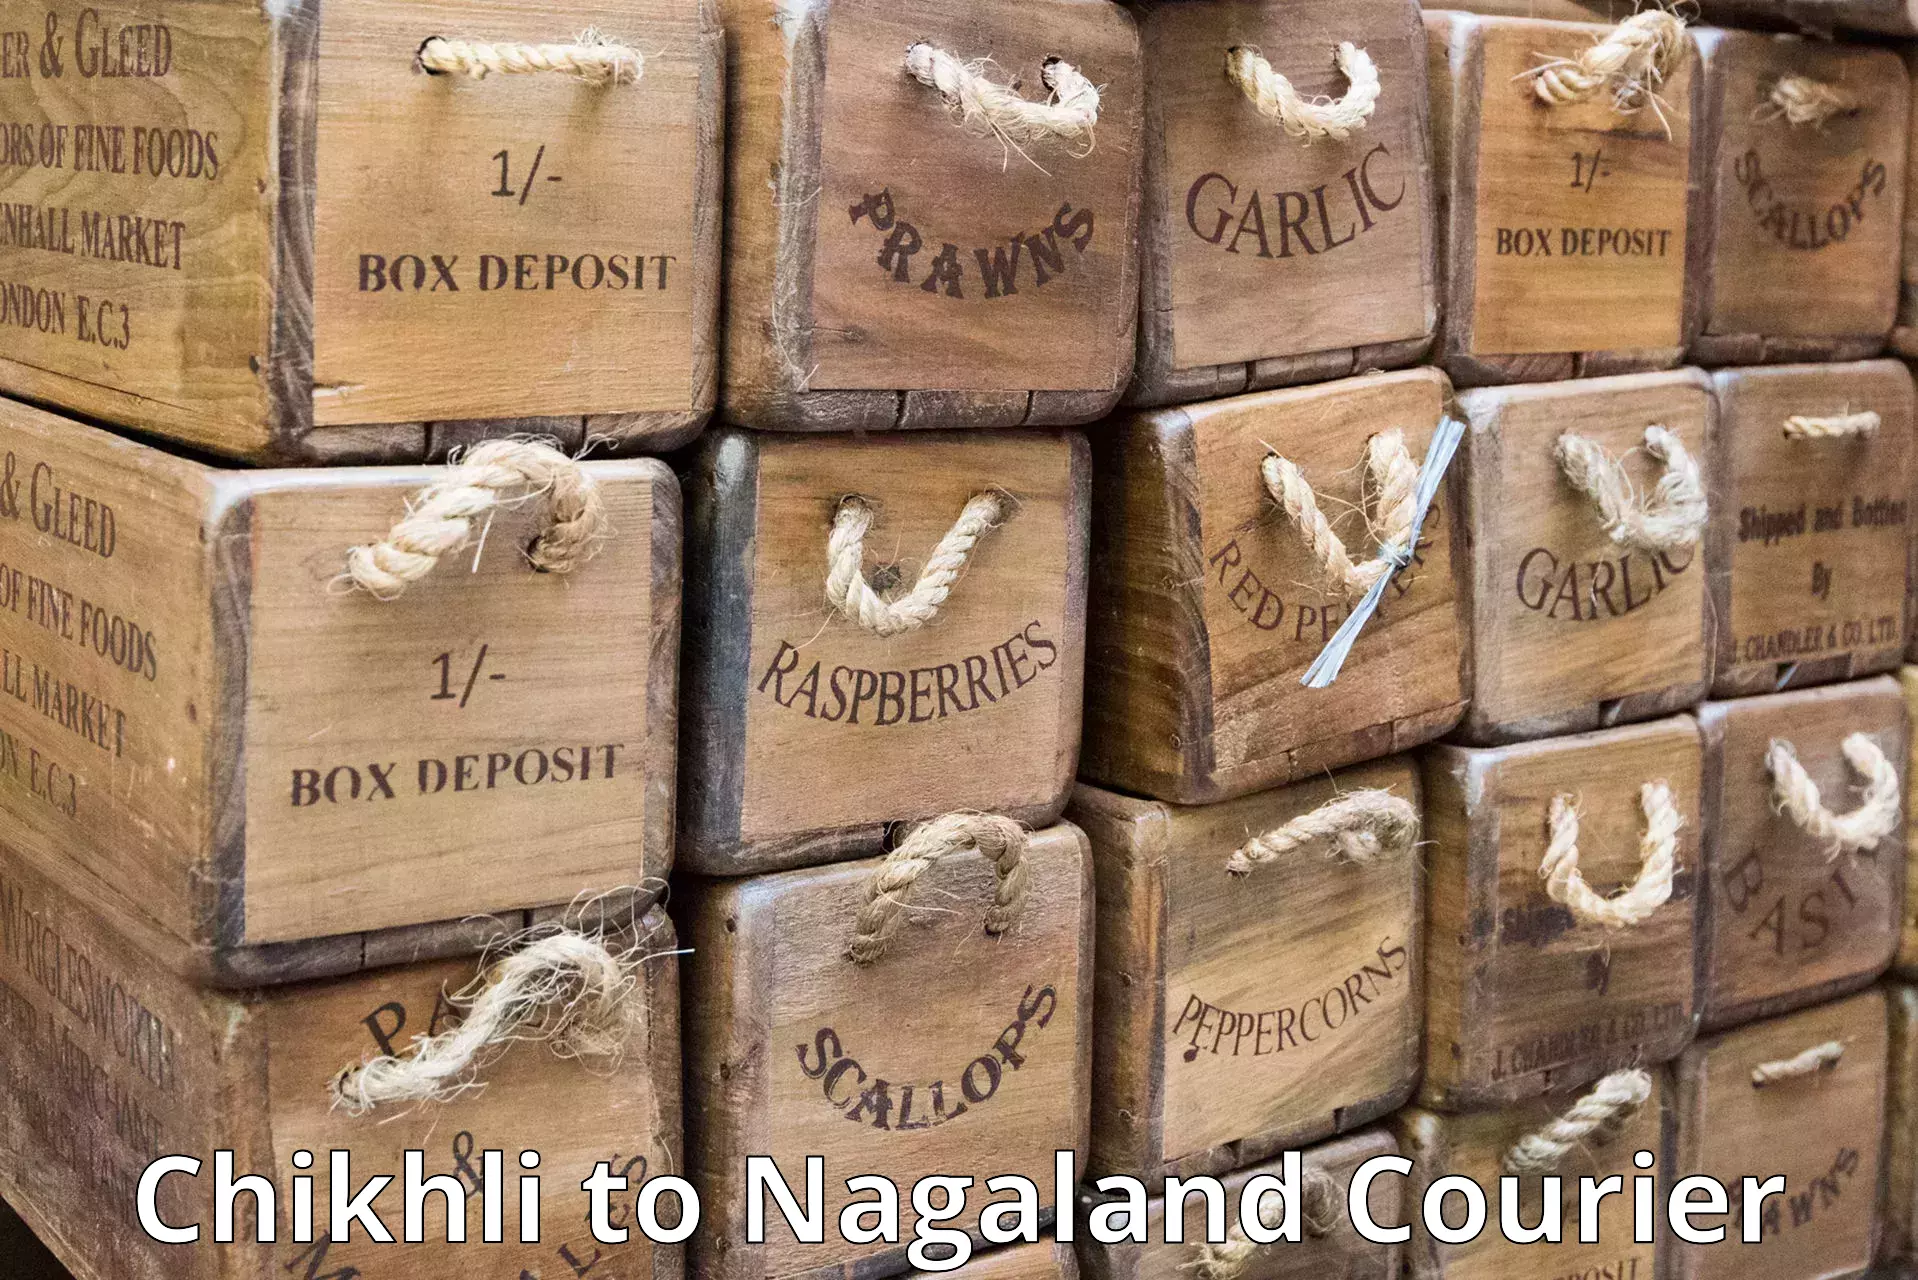 Local delivery service Chikhli to Nagaland